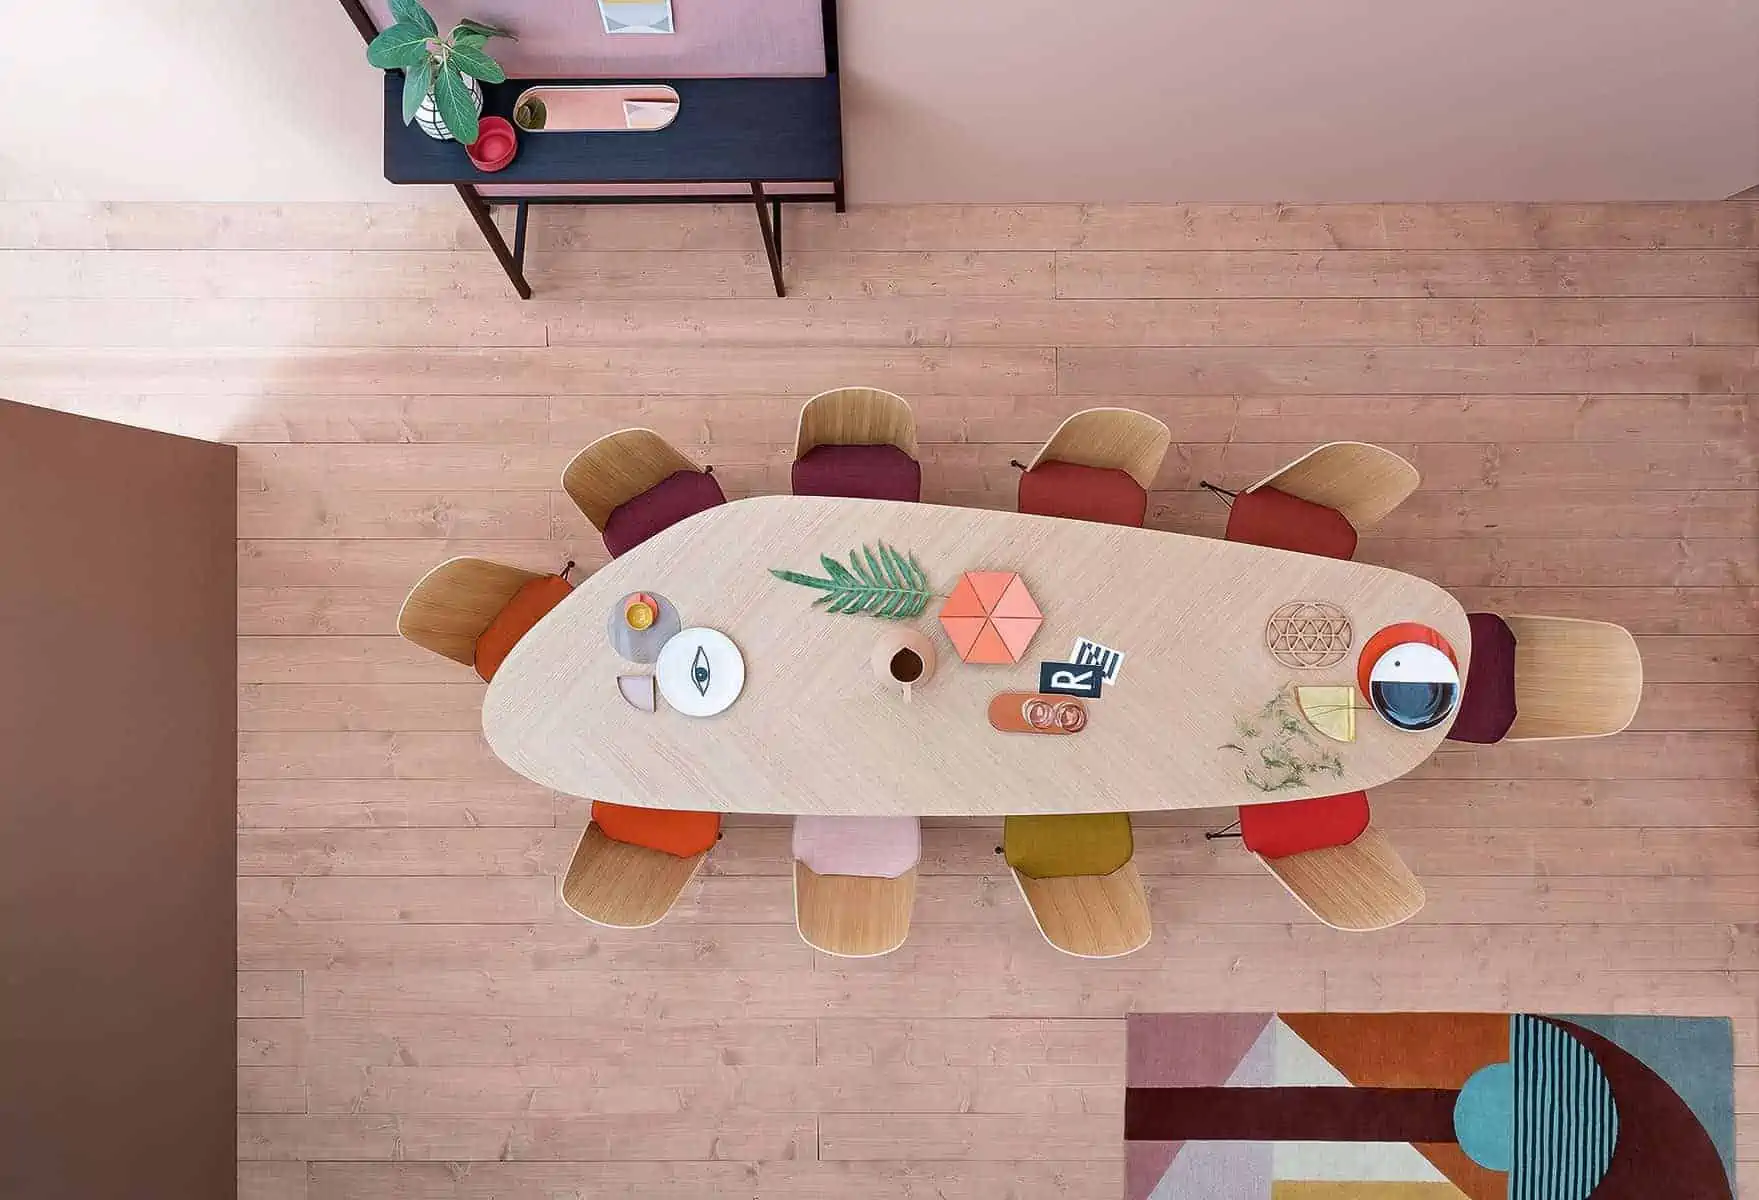 A freeform 10 seater dining dining table set with multicolour cushions, room with wooden floor captured from the ceiling